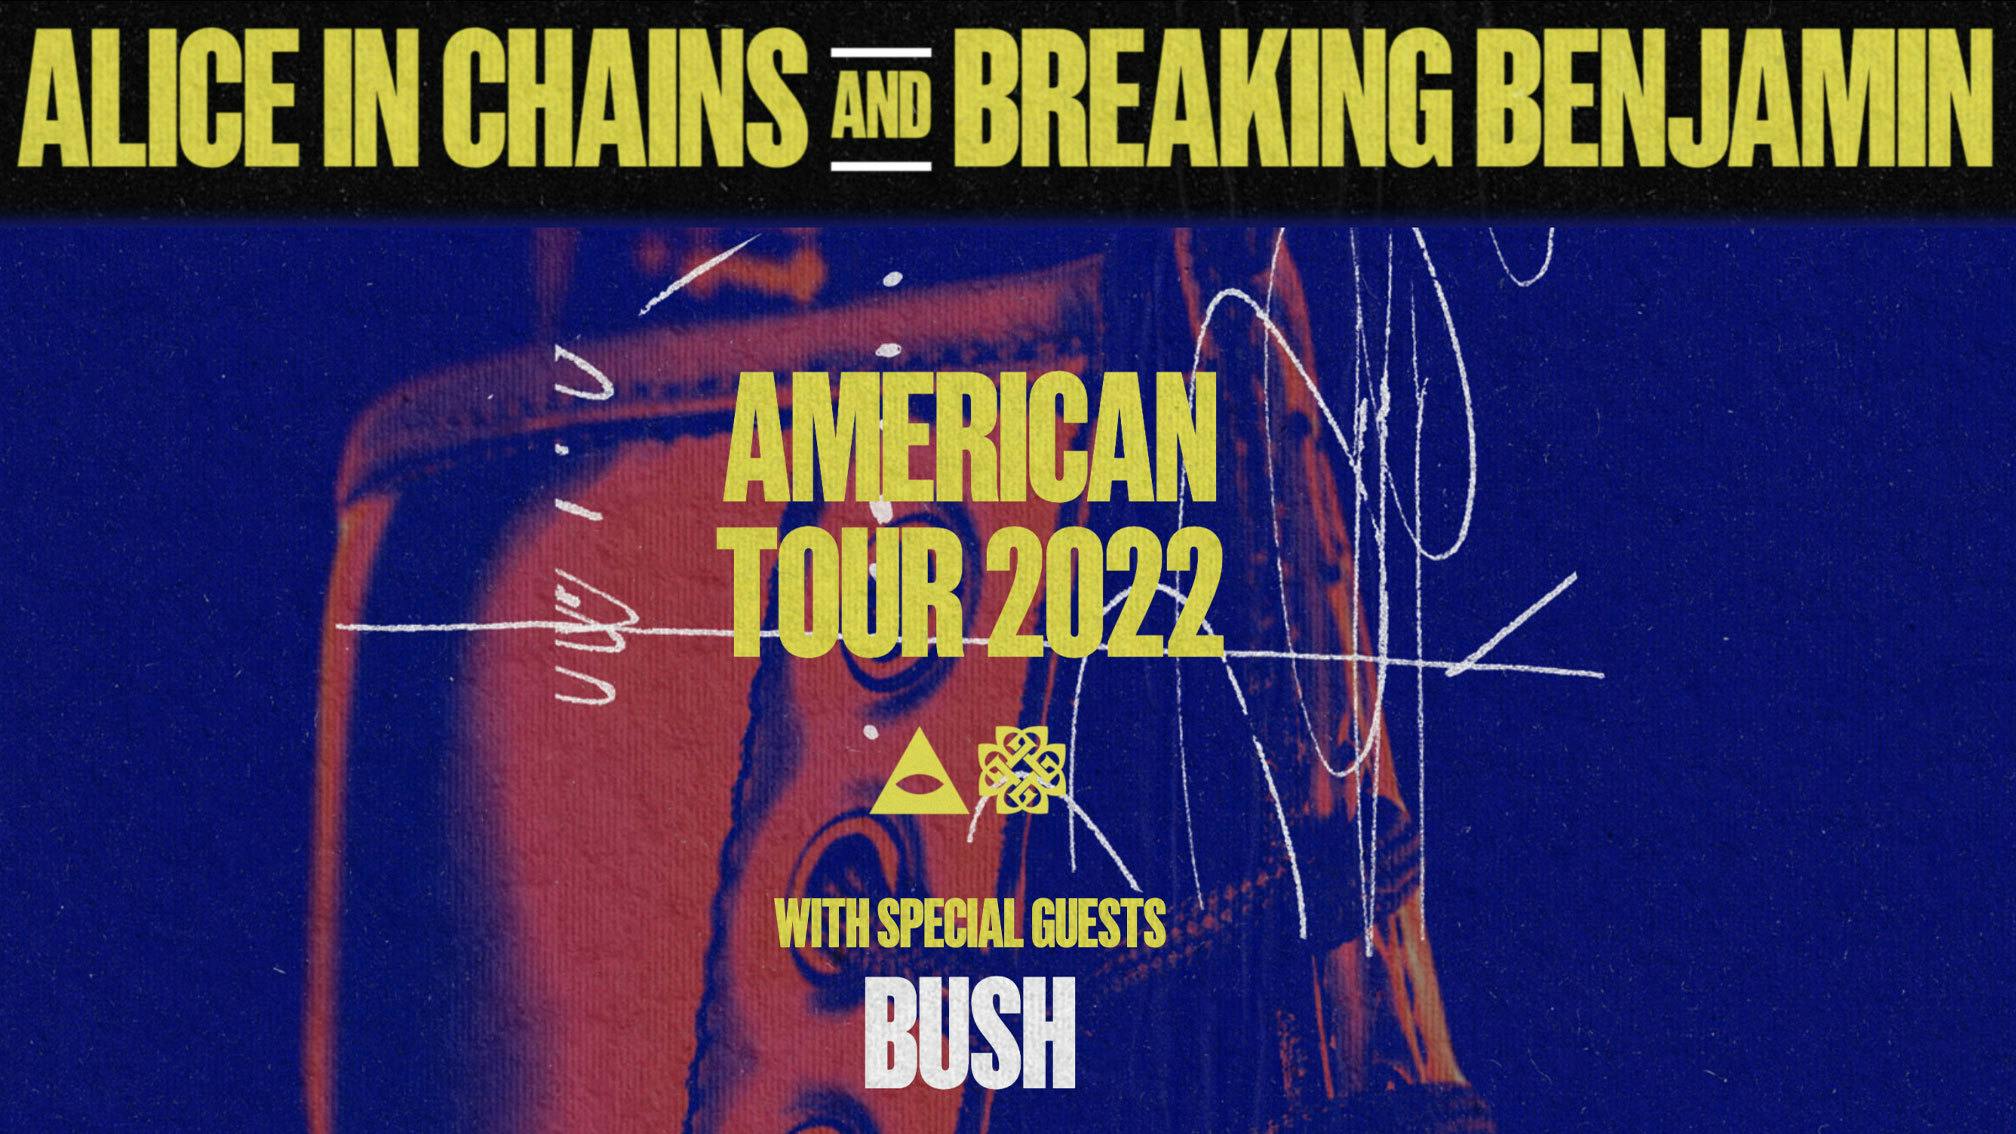 Alice In Chains and Breaking Benjamin announce U.S. co-headline tour